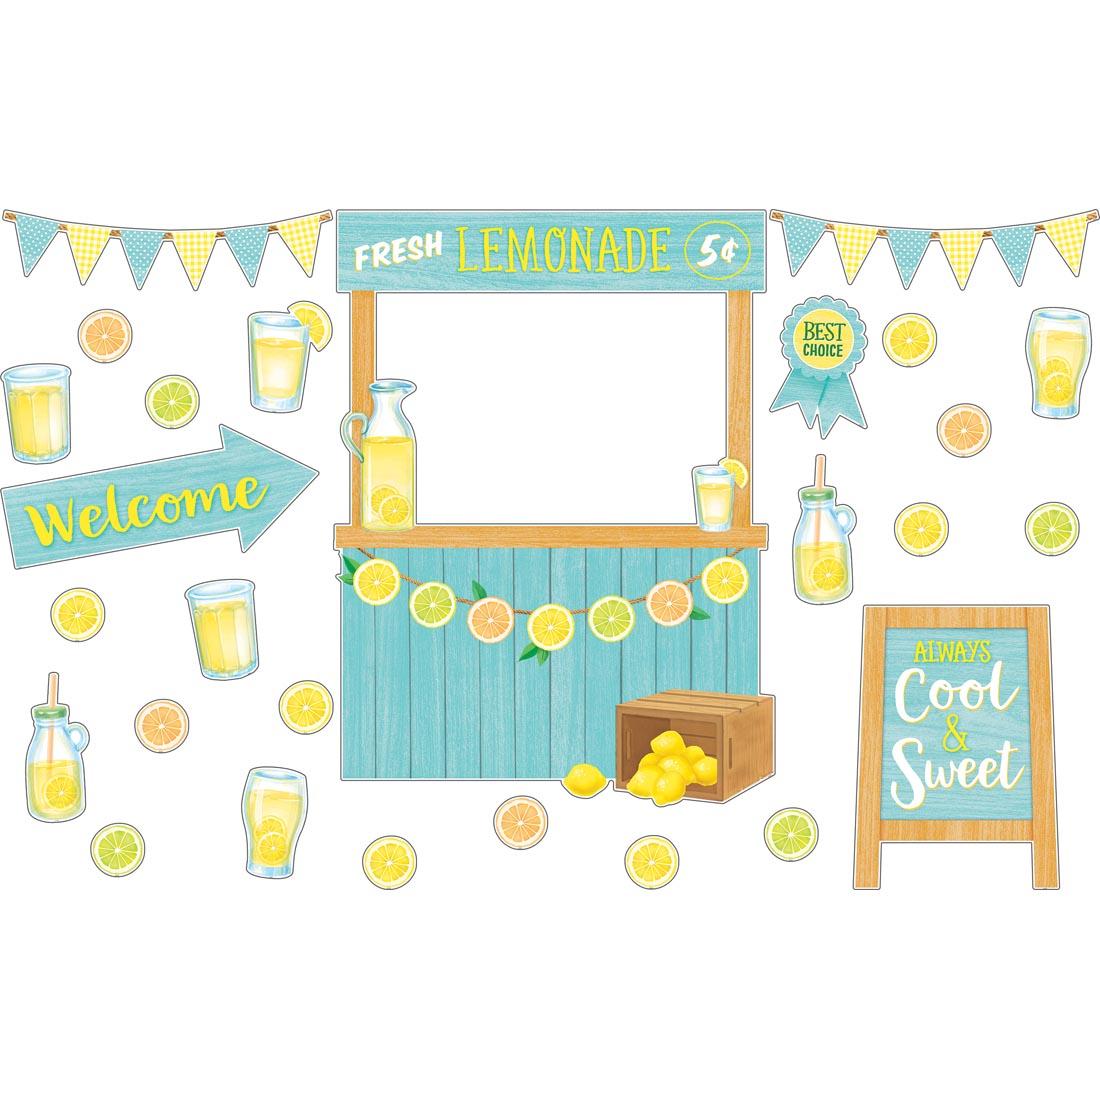 Lemonade Stand Bulletin Board Set from the Lemon Zest collection by Teacher Created Resources